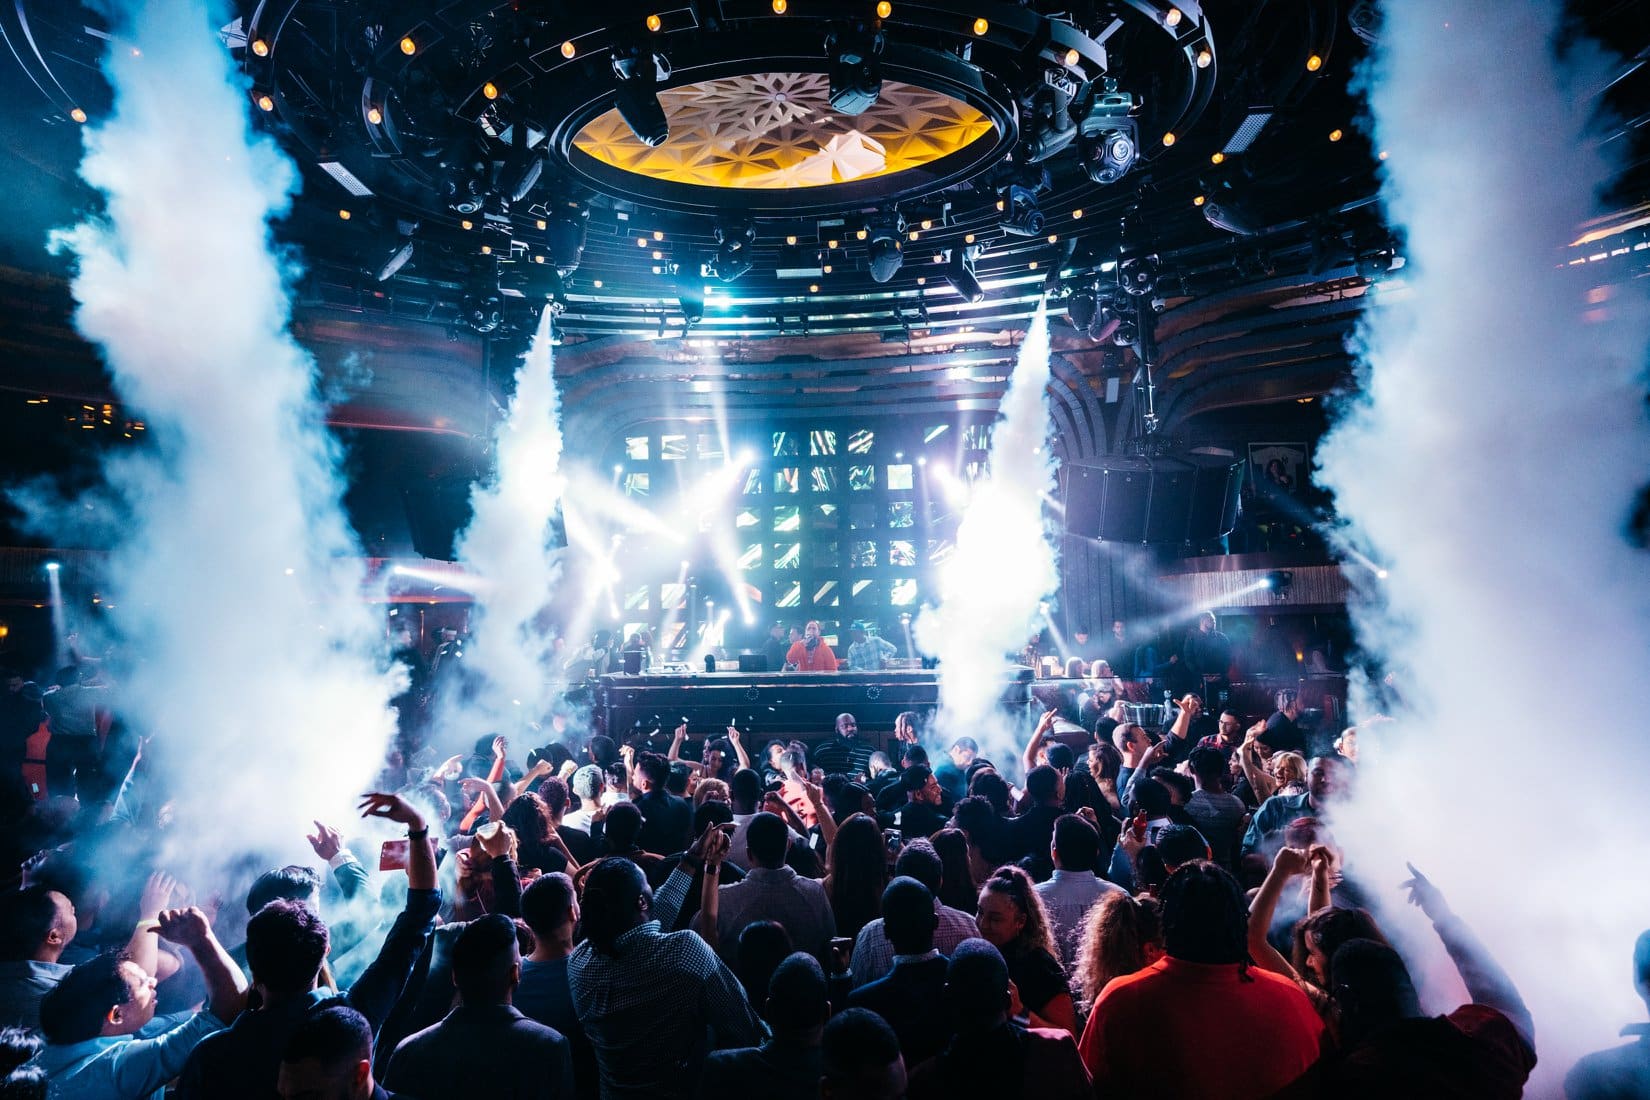 Best las vegas nightclubs for couples at jewel